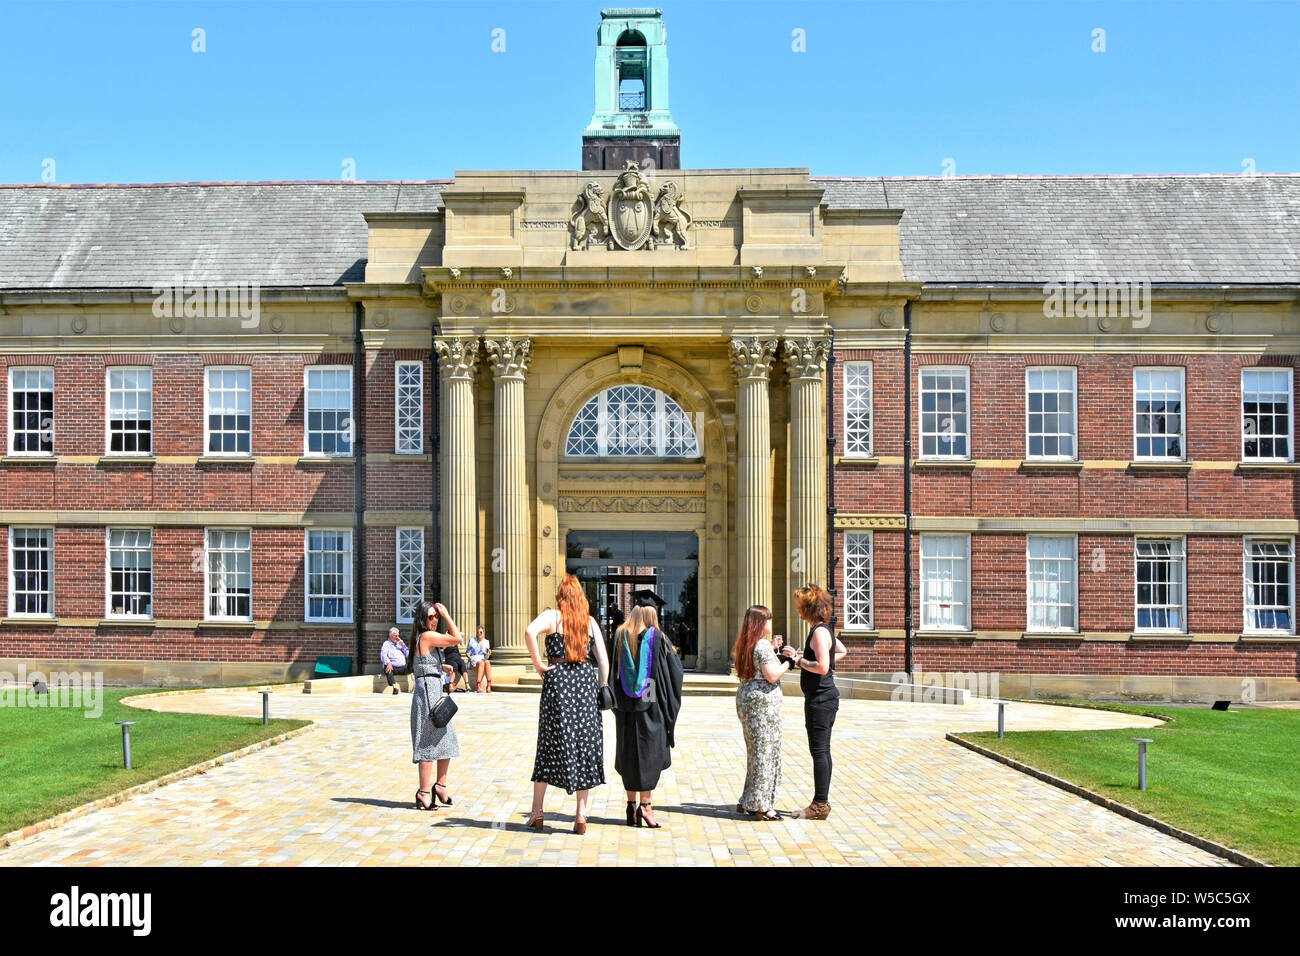 Family & friends Edge Hill University campus entrance on graduation day events confirming student education & degrees Ormskirk Lancashire England UK Stock Photo